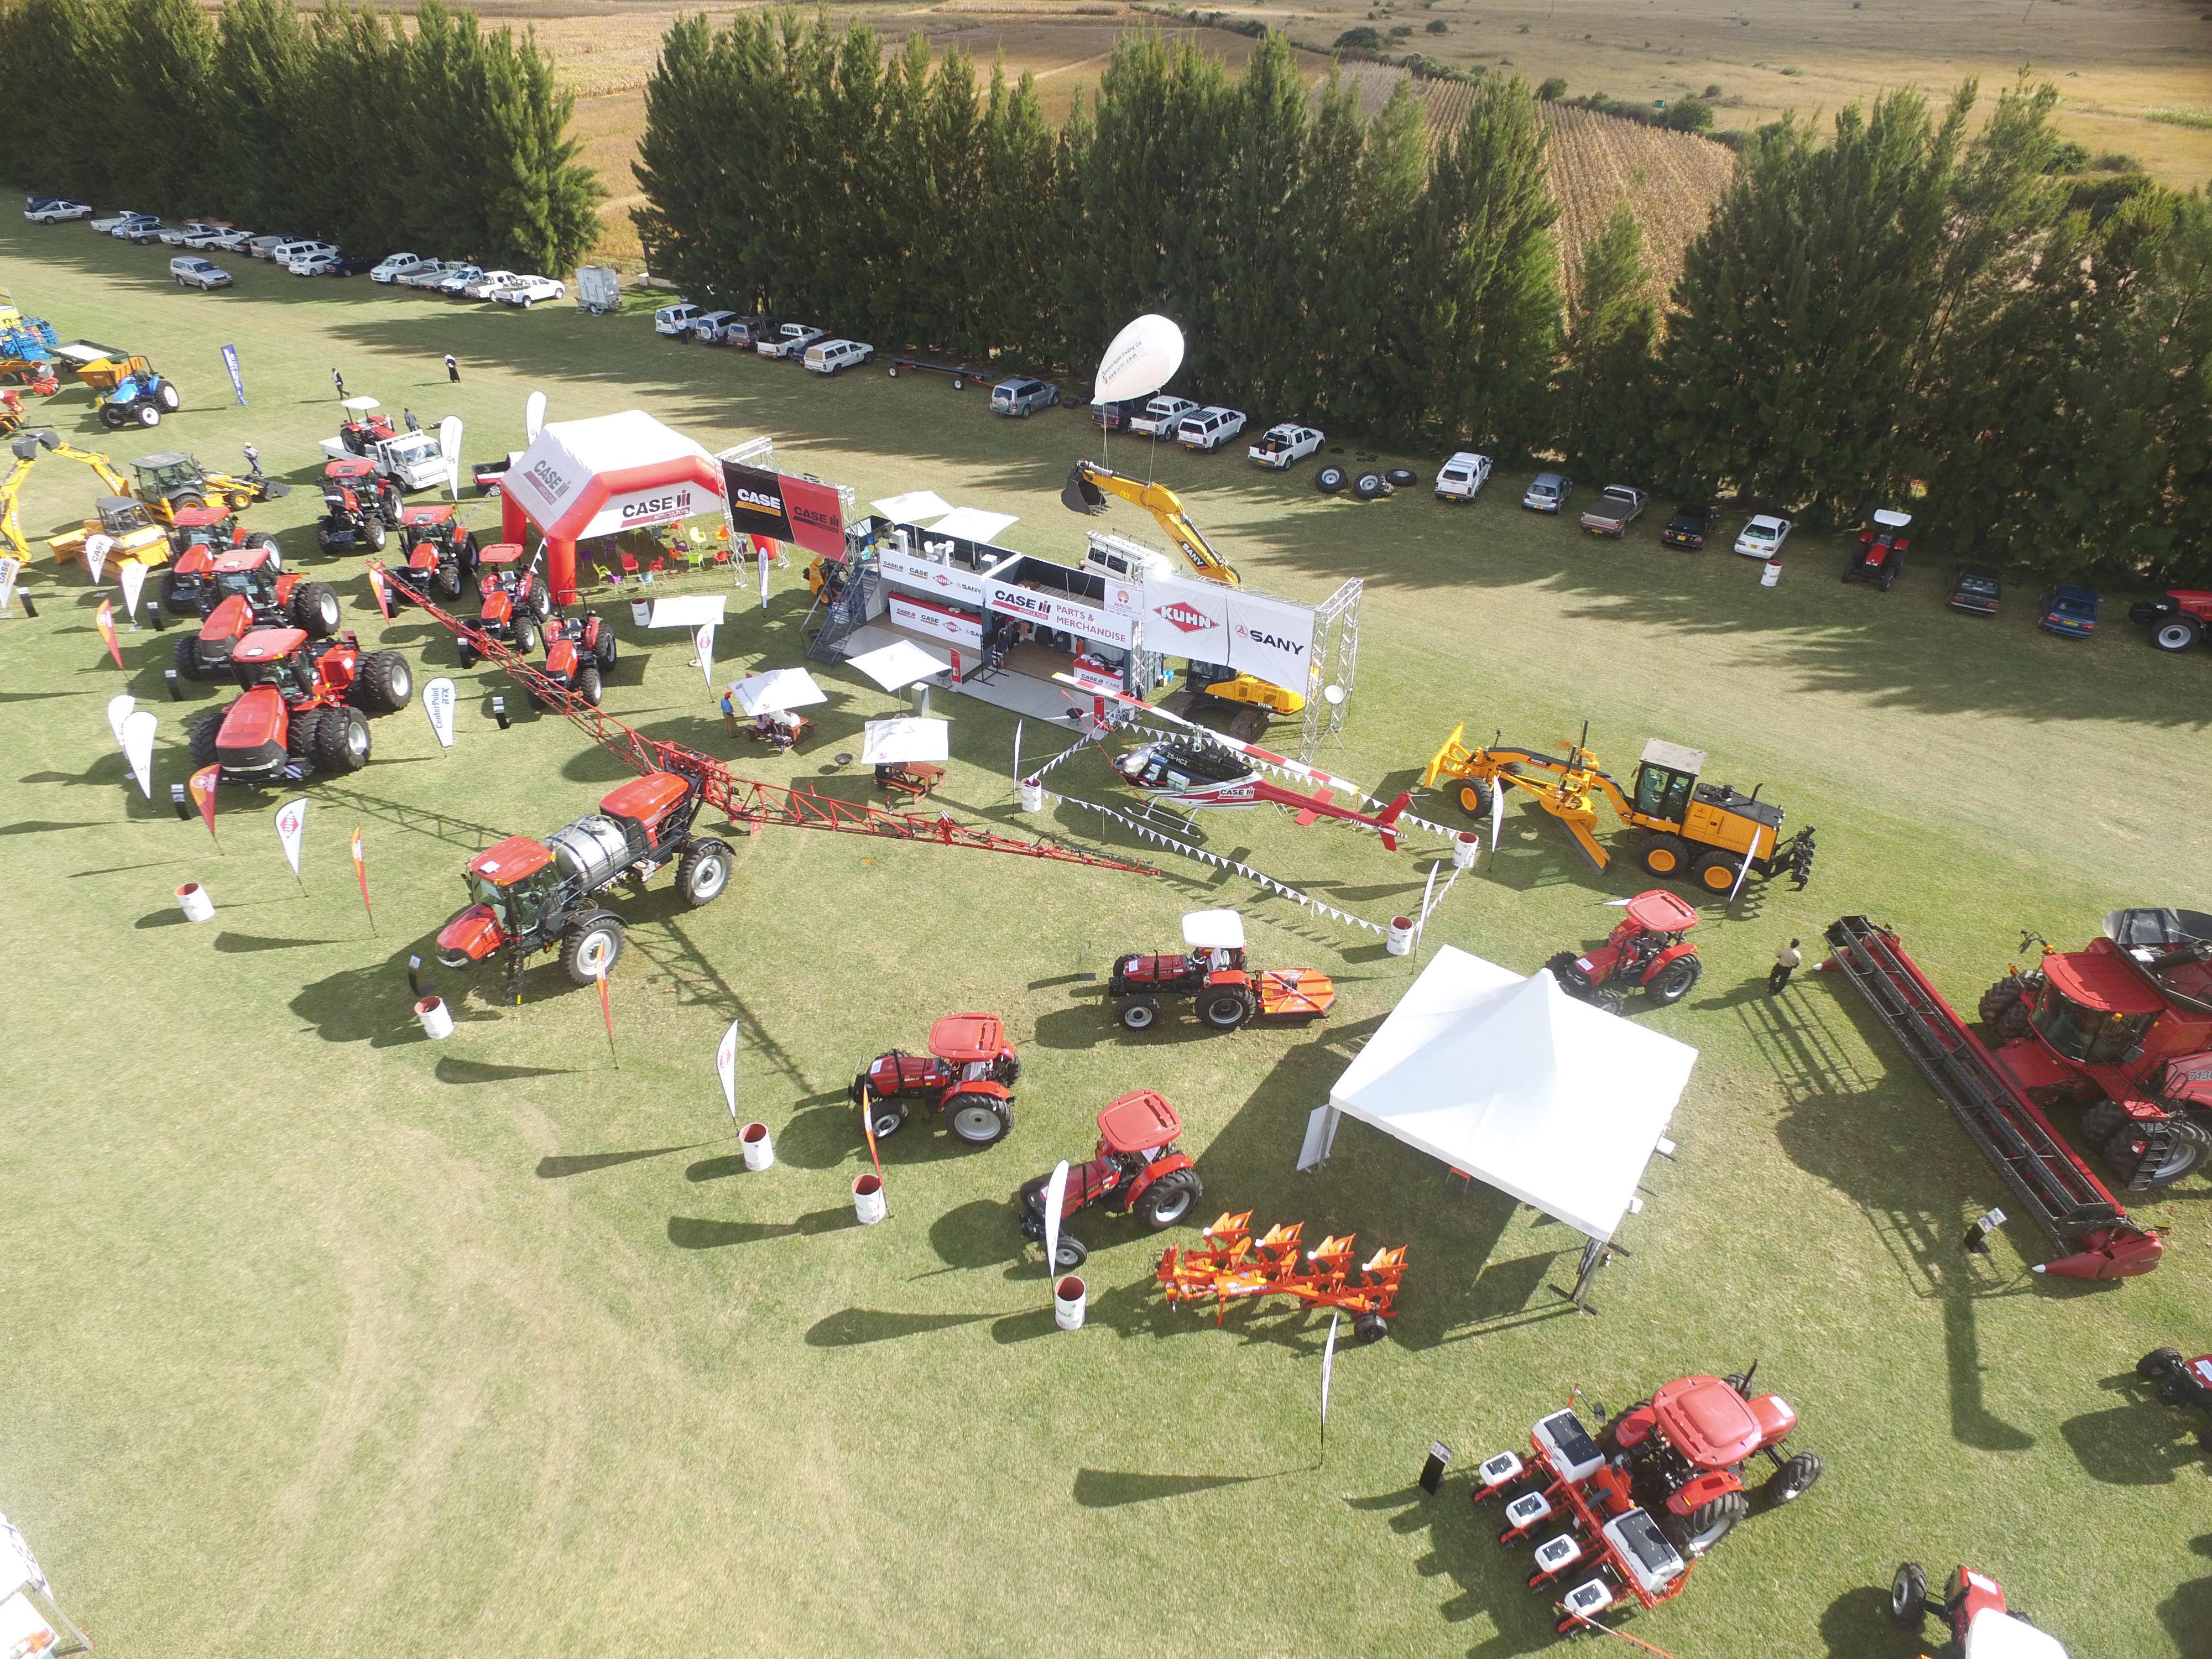 CASE IH ATTRACTS BIG CROWDS AT ADMA AGRISHOW 2016 IN HARARE  (AFRICA)